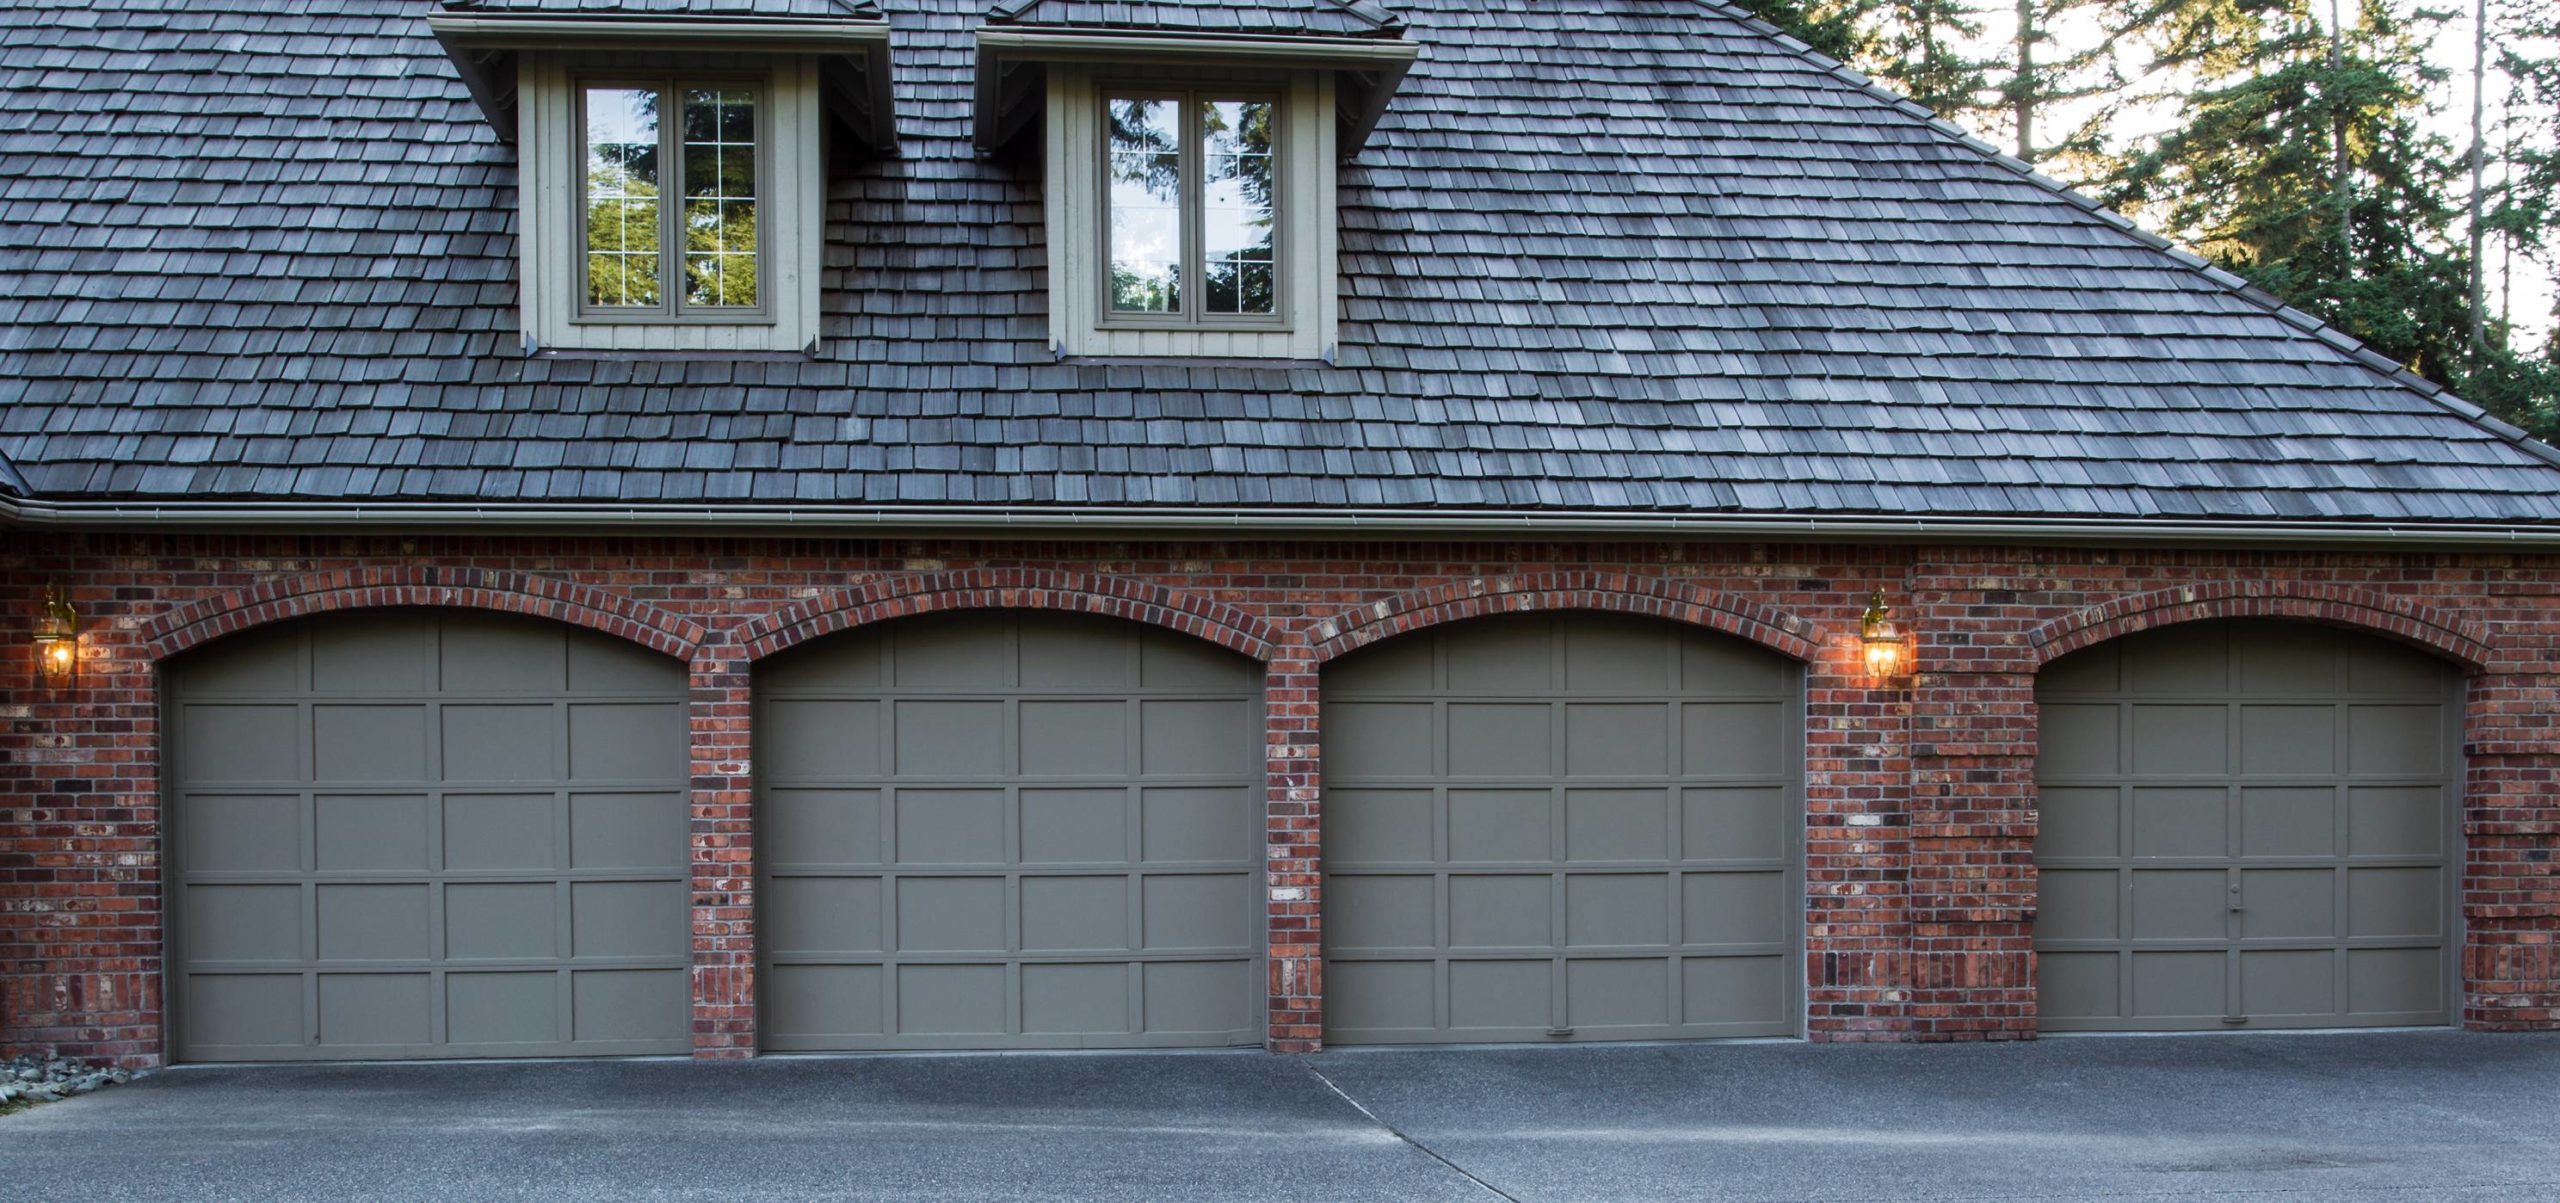 How to sell my garage door installation and repair business